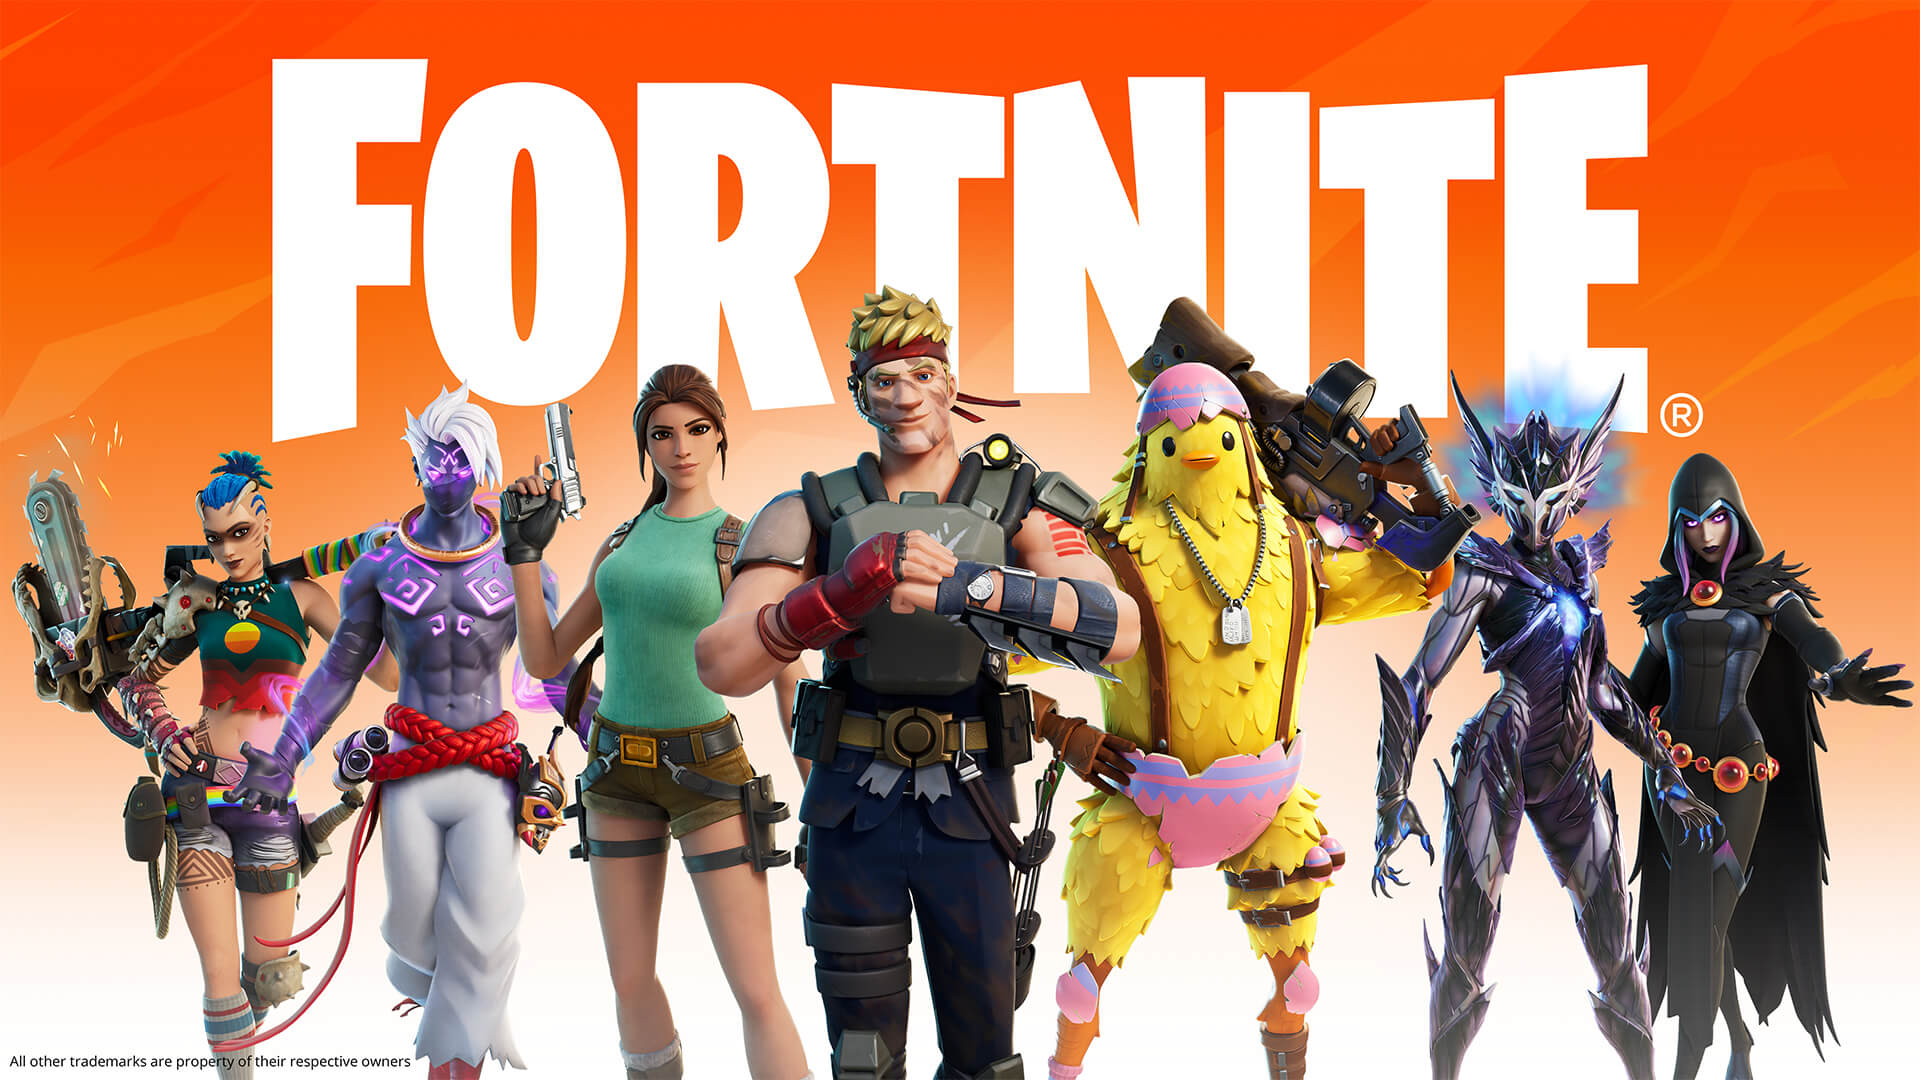 Fortnite for offered in Play Store fight - 9to5Google